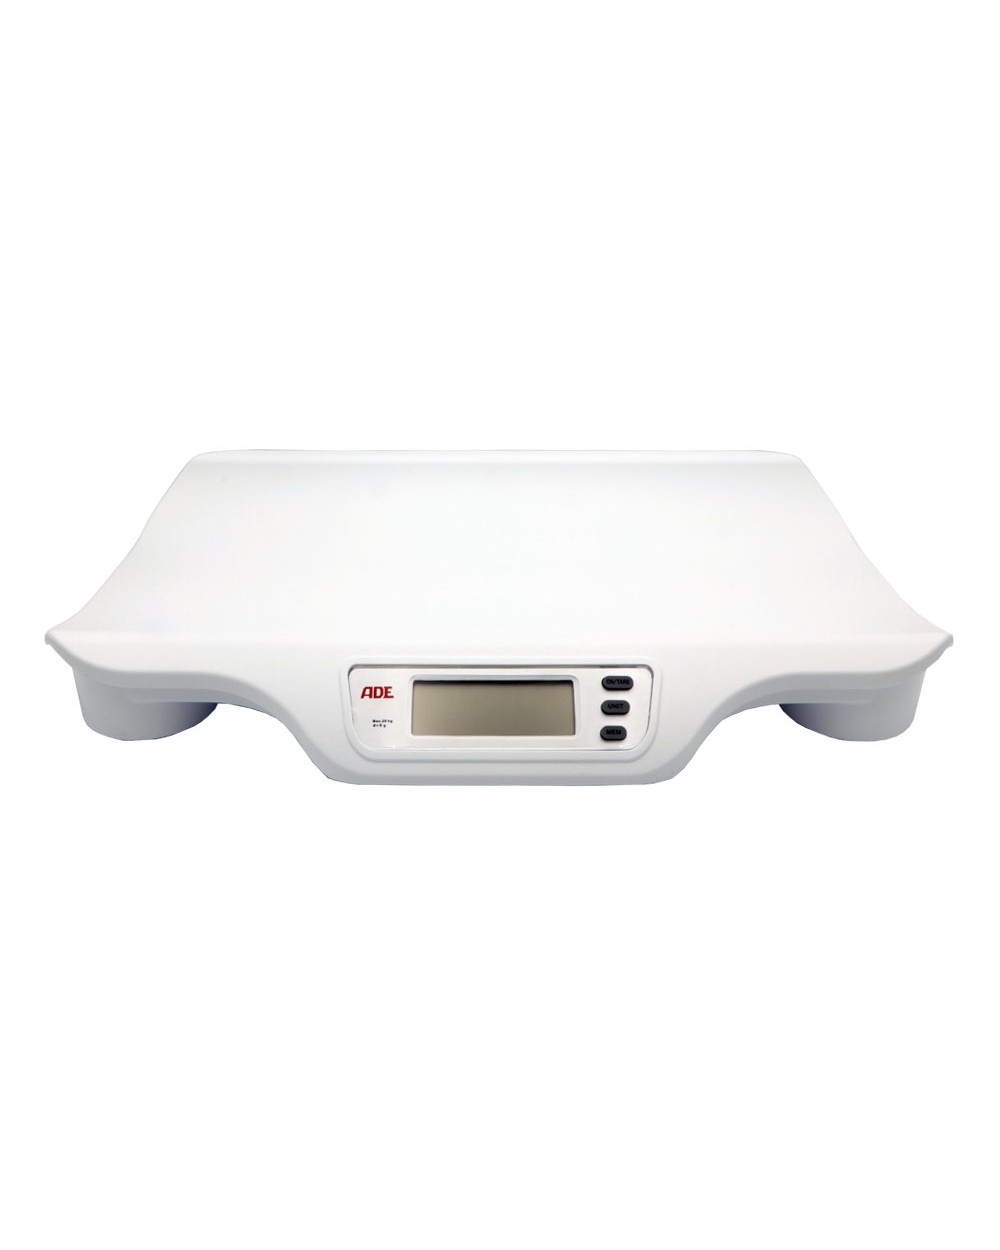 Small Weight Scale, Small Animal Scale